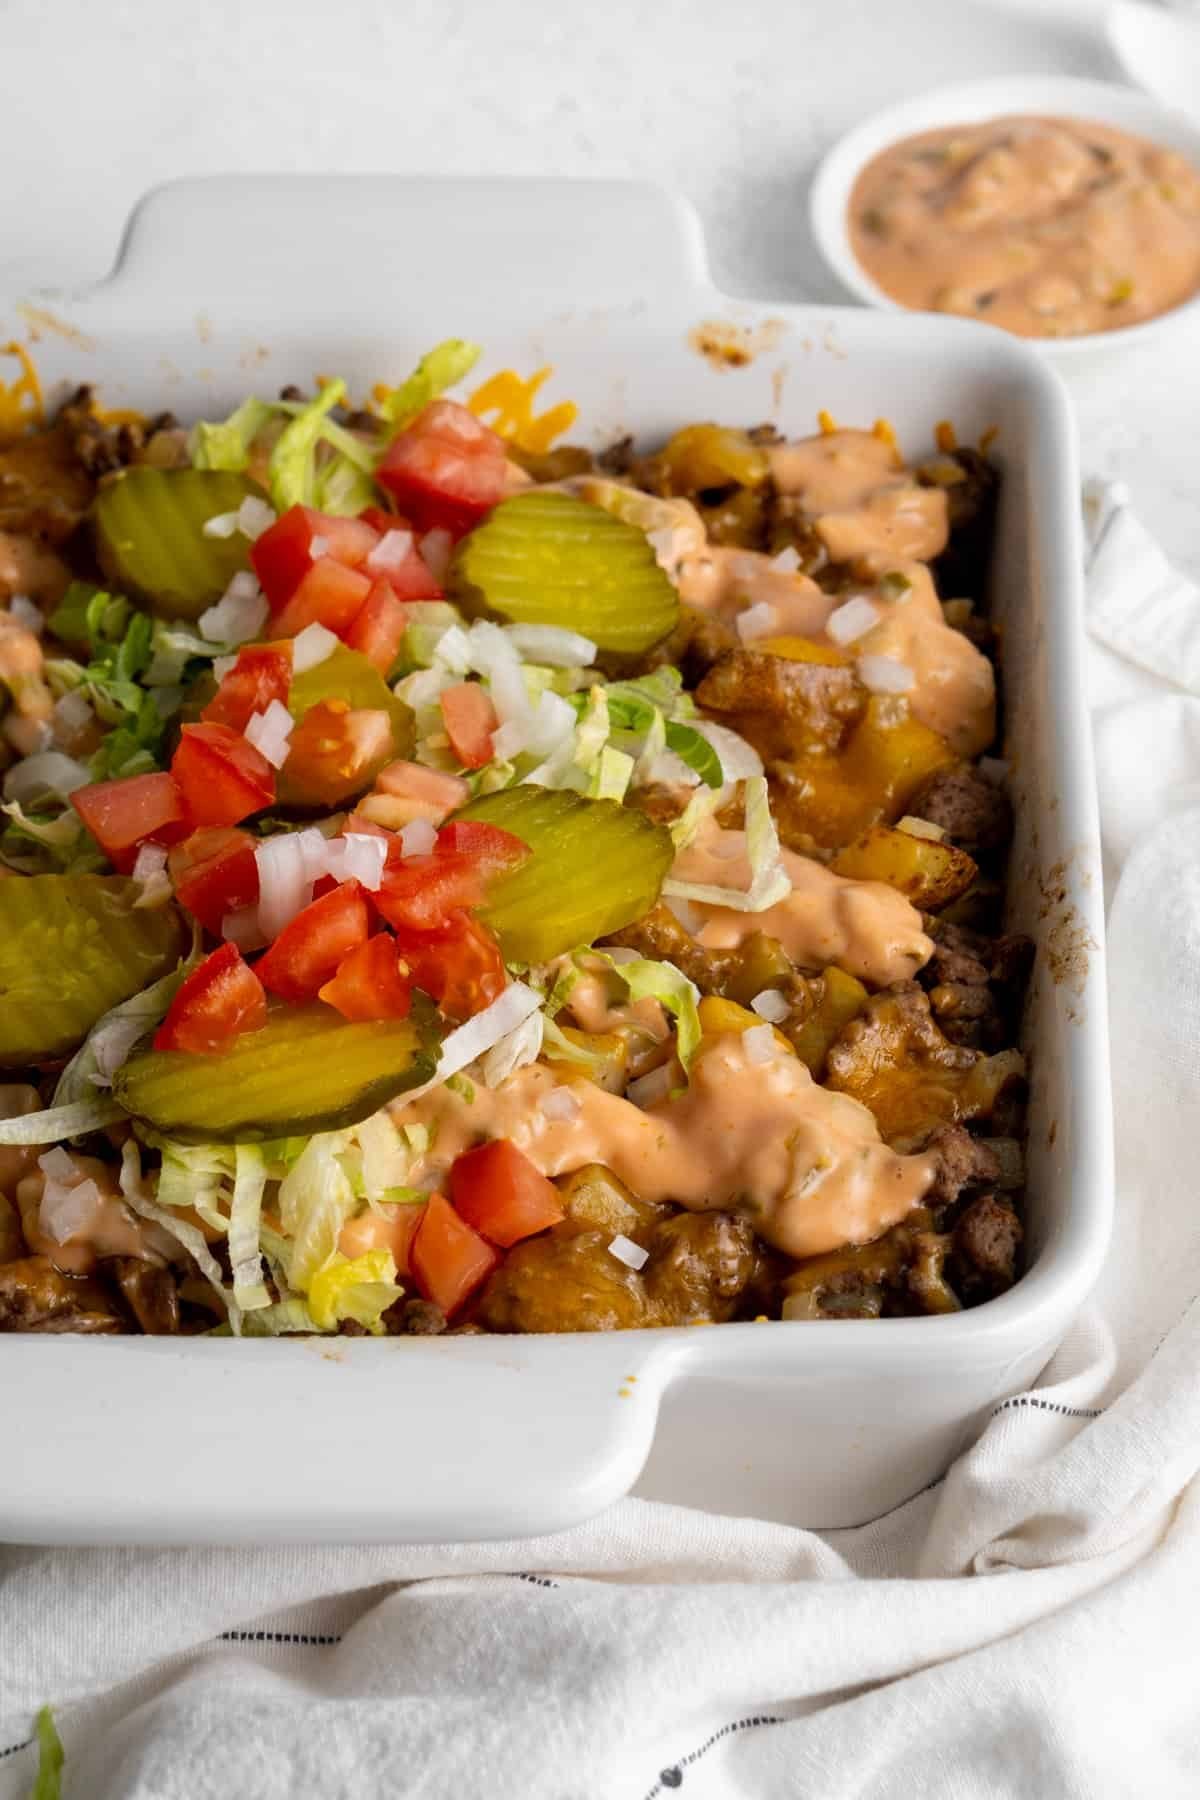 Big mac casserole topped with pickles, lettuce, and tomatoes.